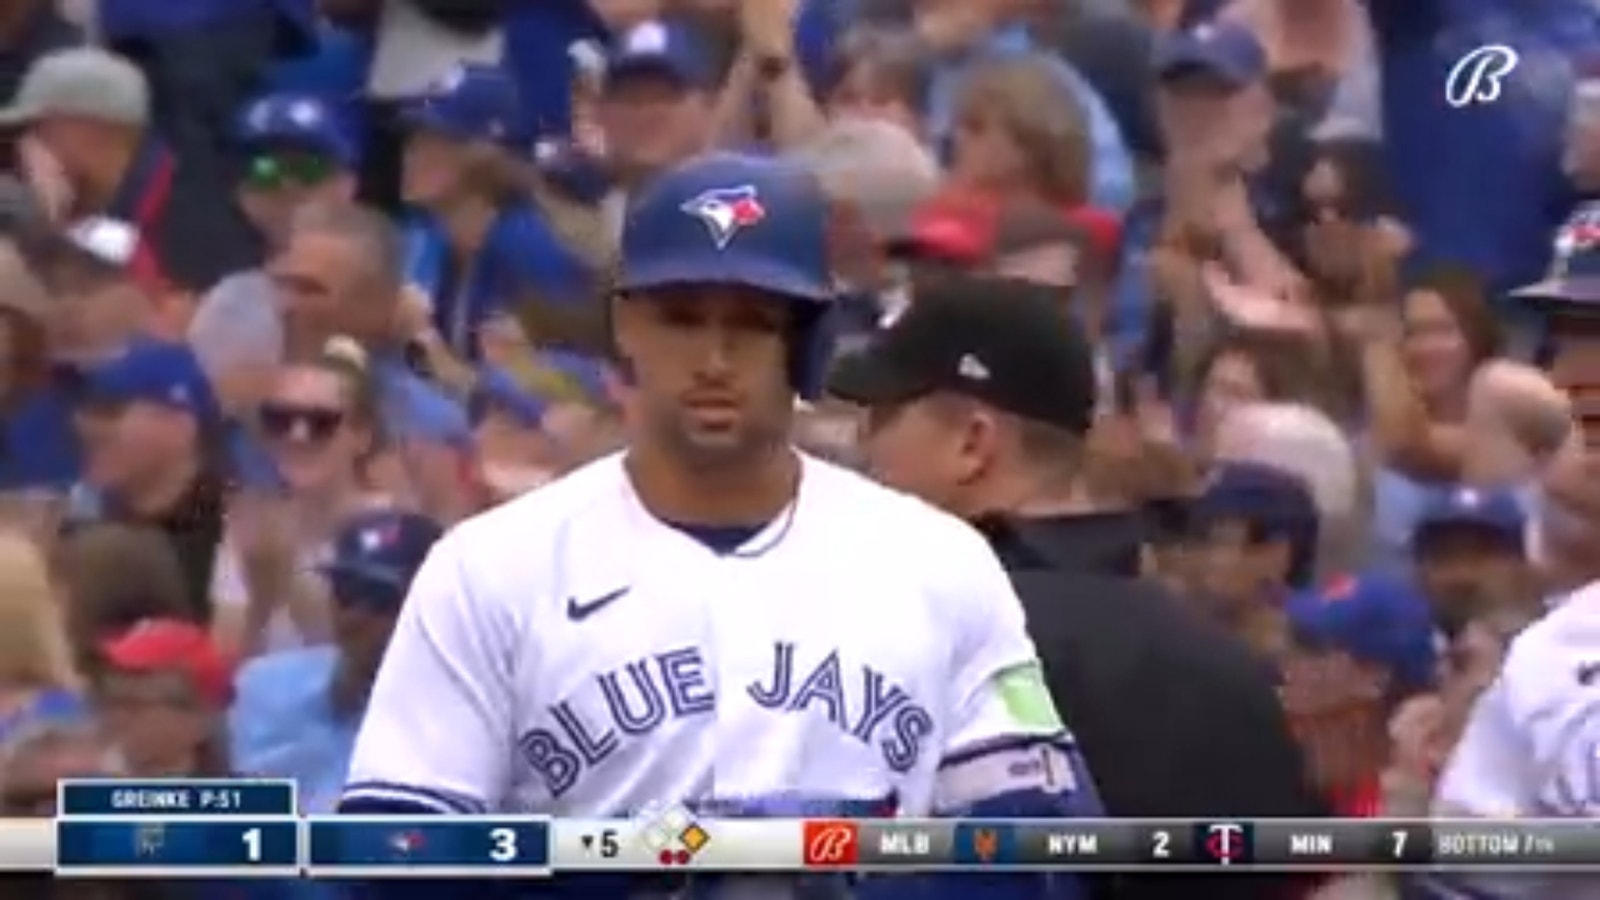 Highlights from Blue Jays' 5-1 win over Royals